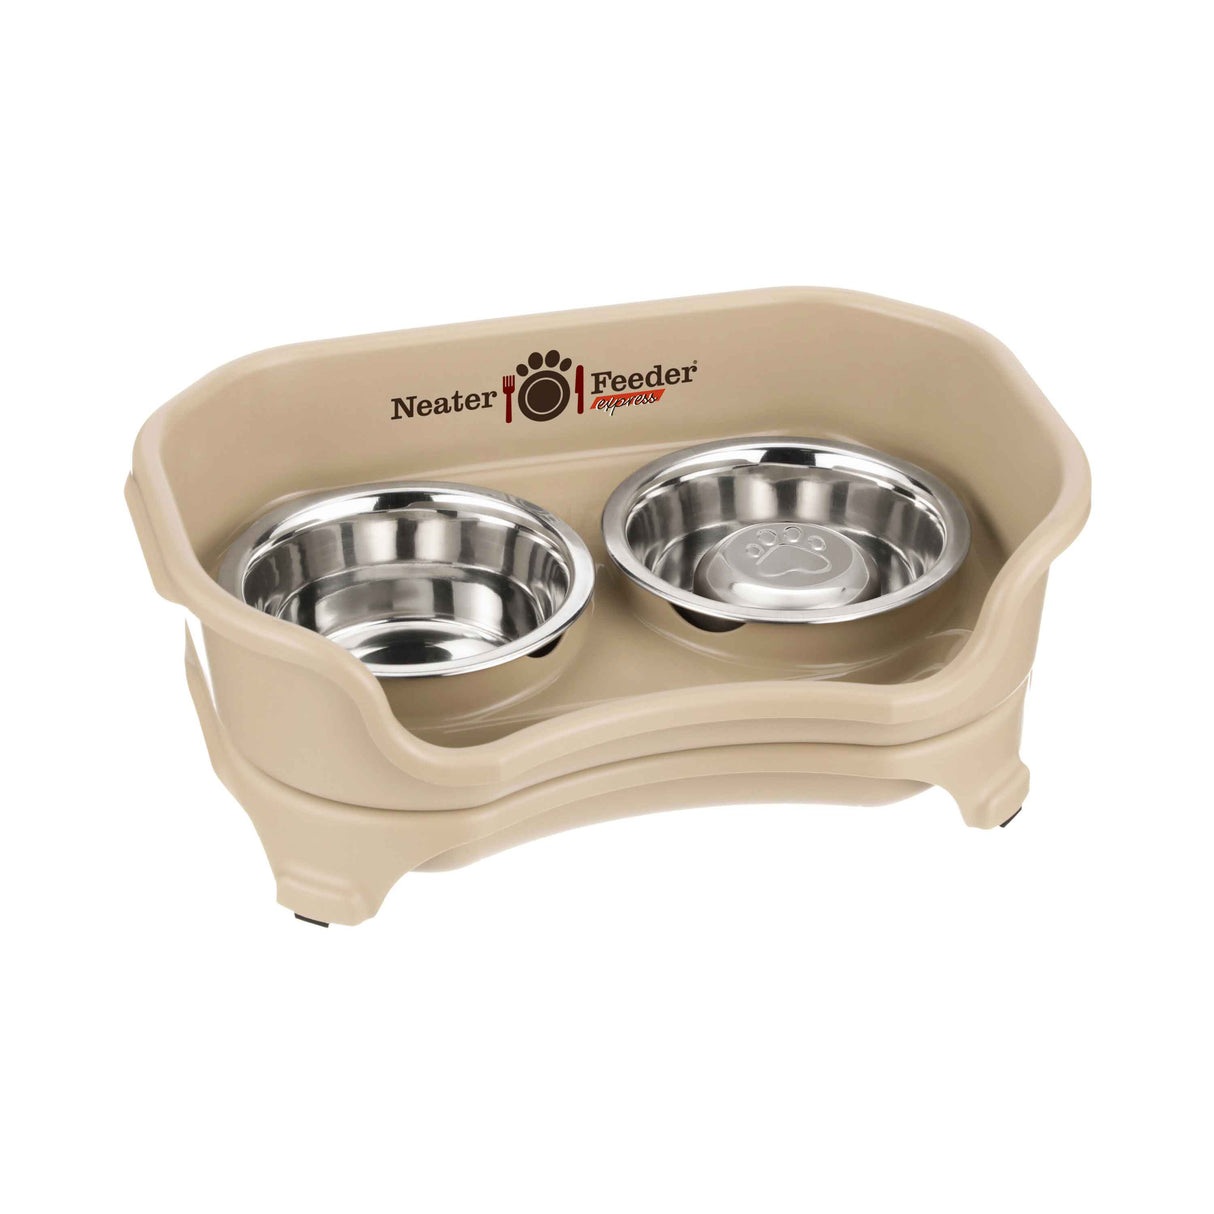 The Niner Slow Feed Bowl - Fits Inside of Select Neater Feeders